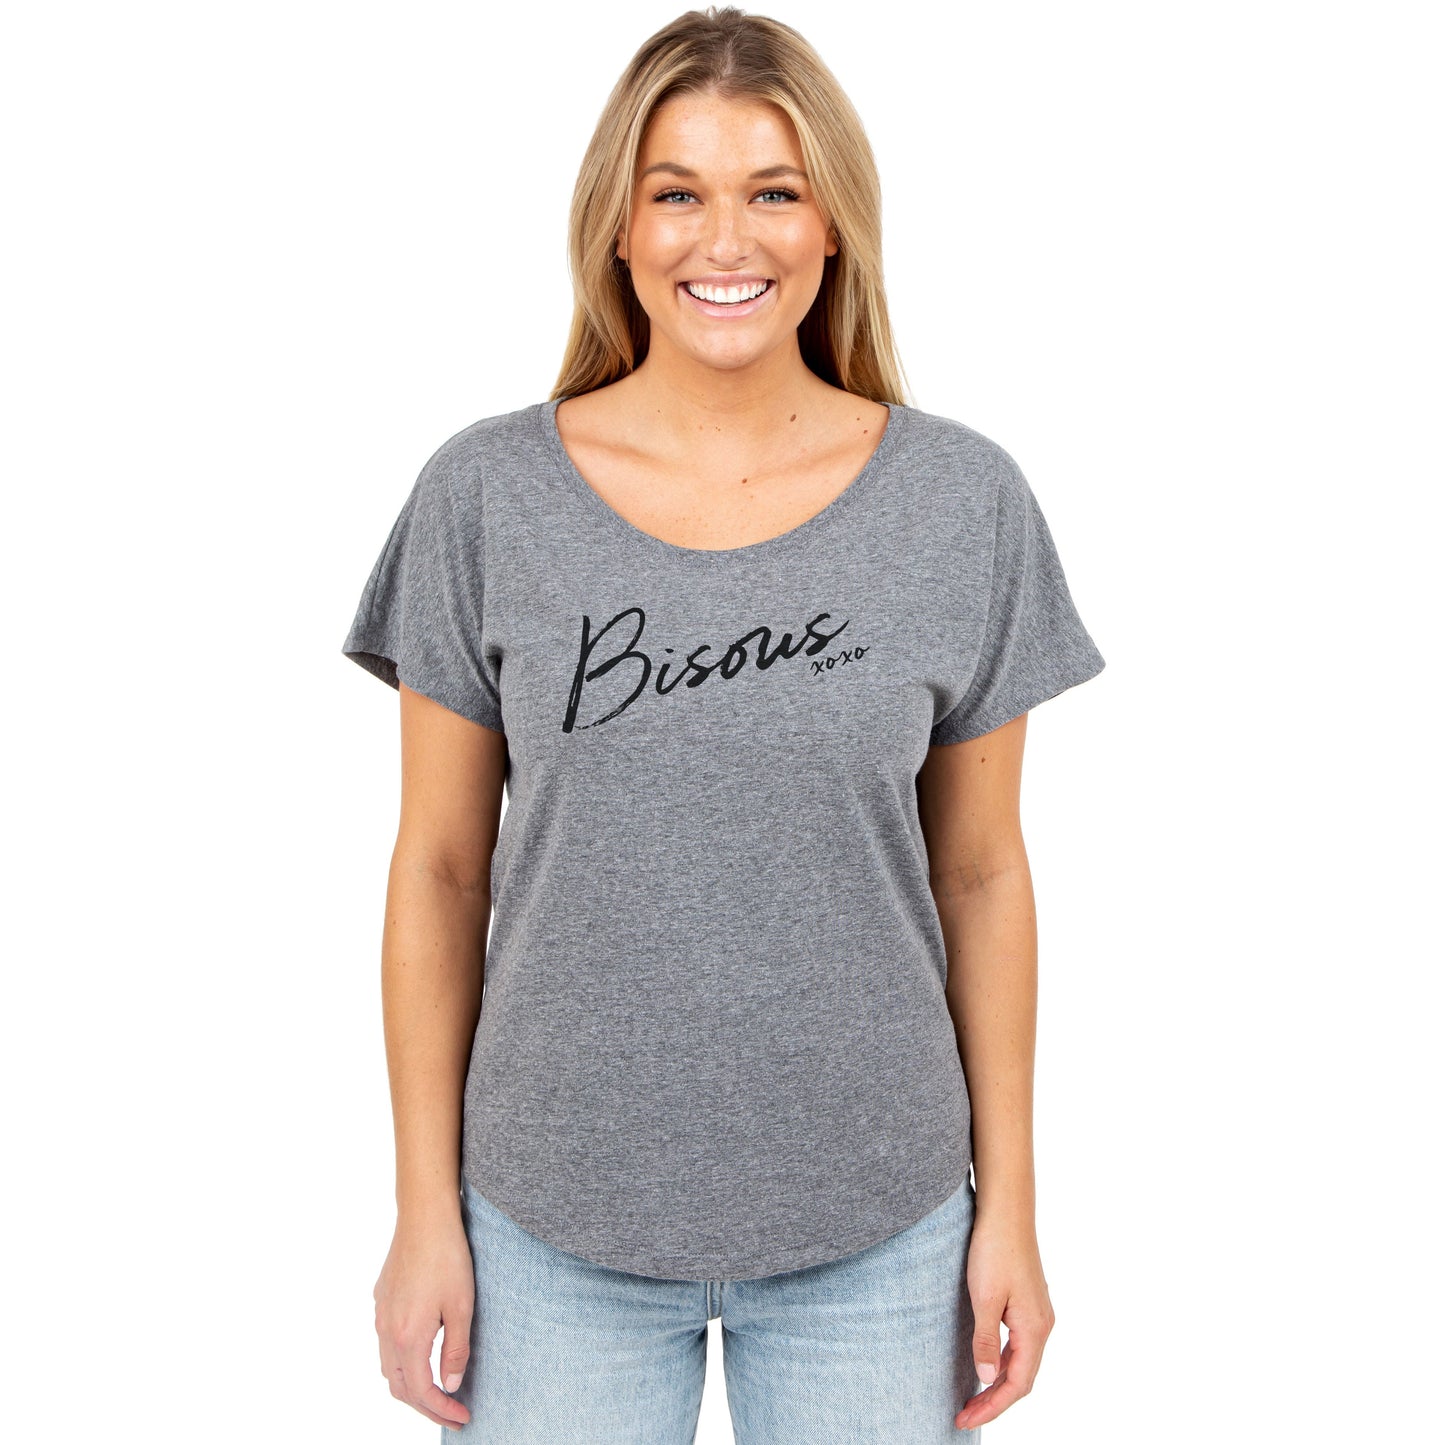 Bisous XOXO Women's Relaxed Slouchy Dolman T-Shirt Tee Heather Grey Model
